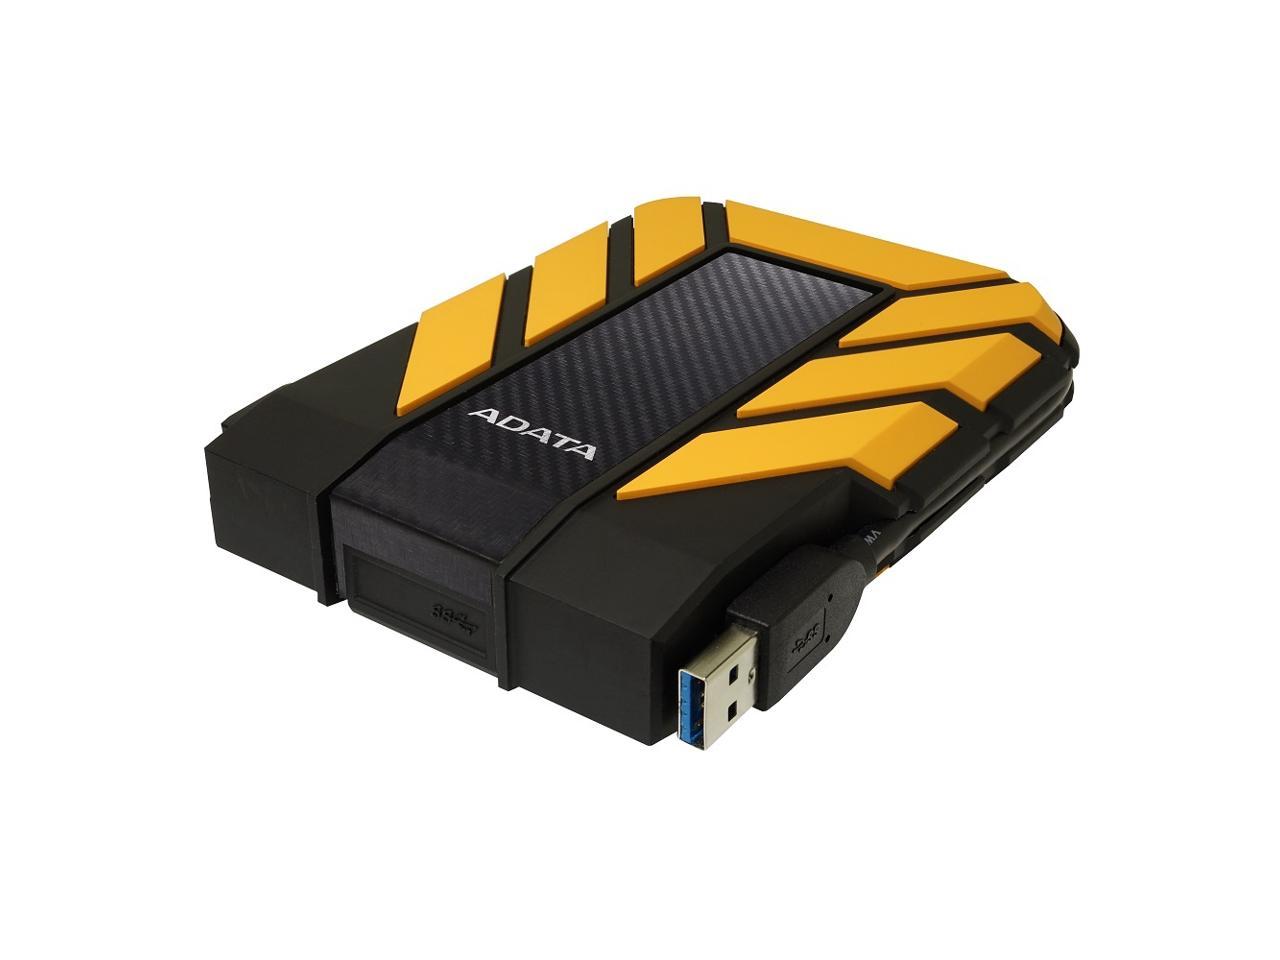 ADATA Durable Series HD710: 2TB Yellow External USB 3.1 Portable Hard Drive Gaming Console Compatible